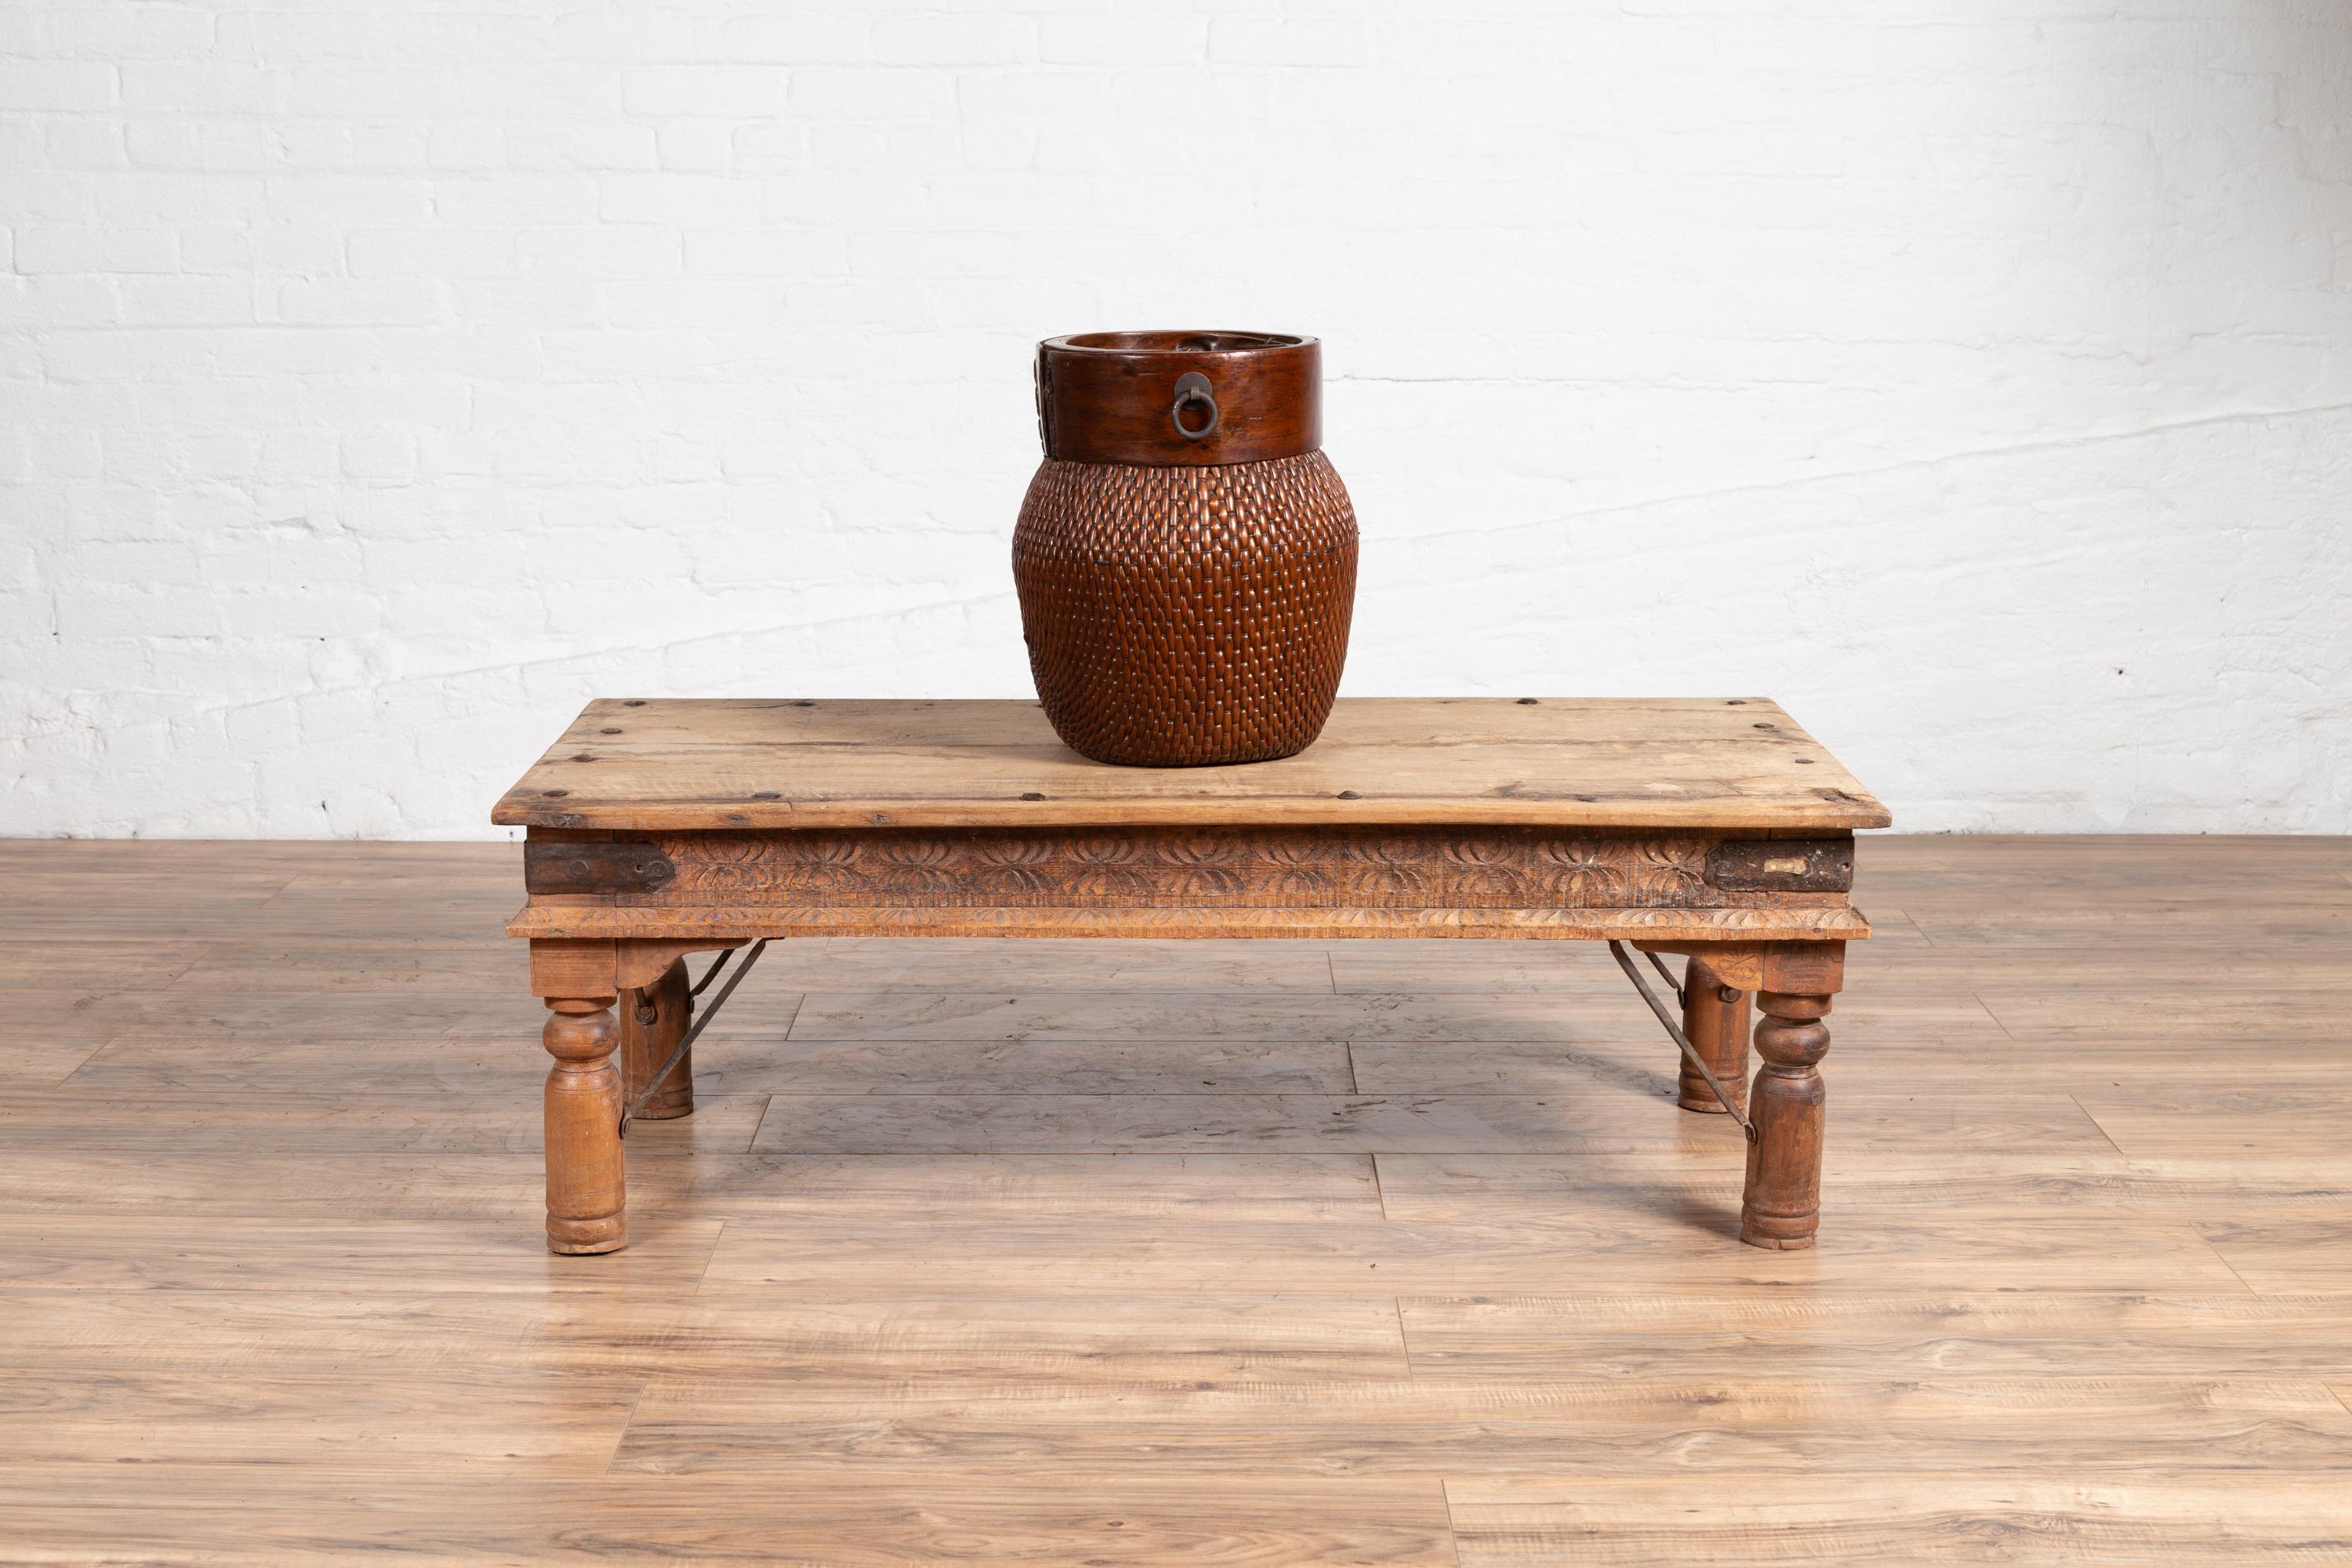 An antique rustic Indian low coffee table from the early 20th century, possibly made of sheesham wood with iron nailheads. We have several tables available with size variations. Born in India during the early years of the 20th century, this charming